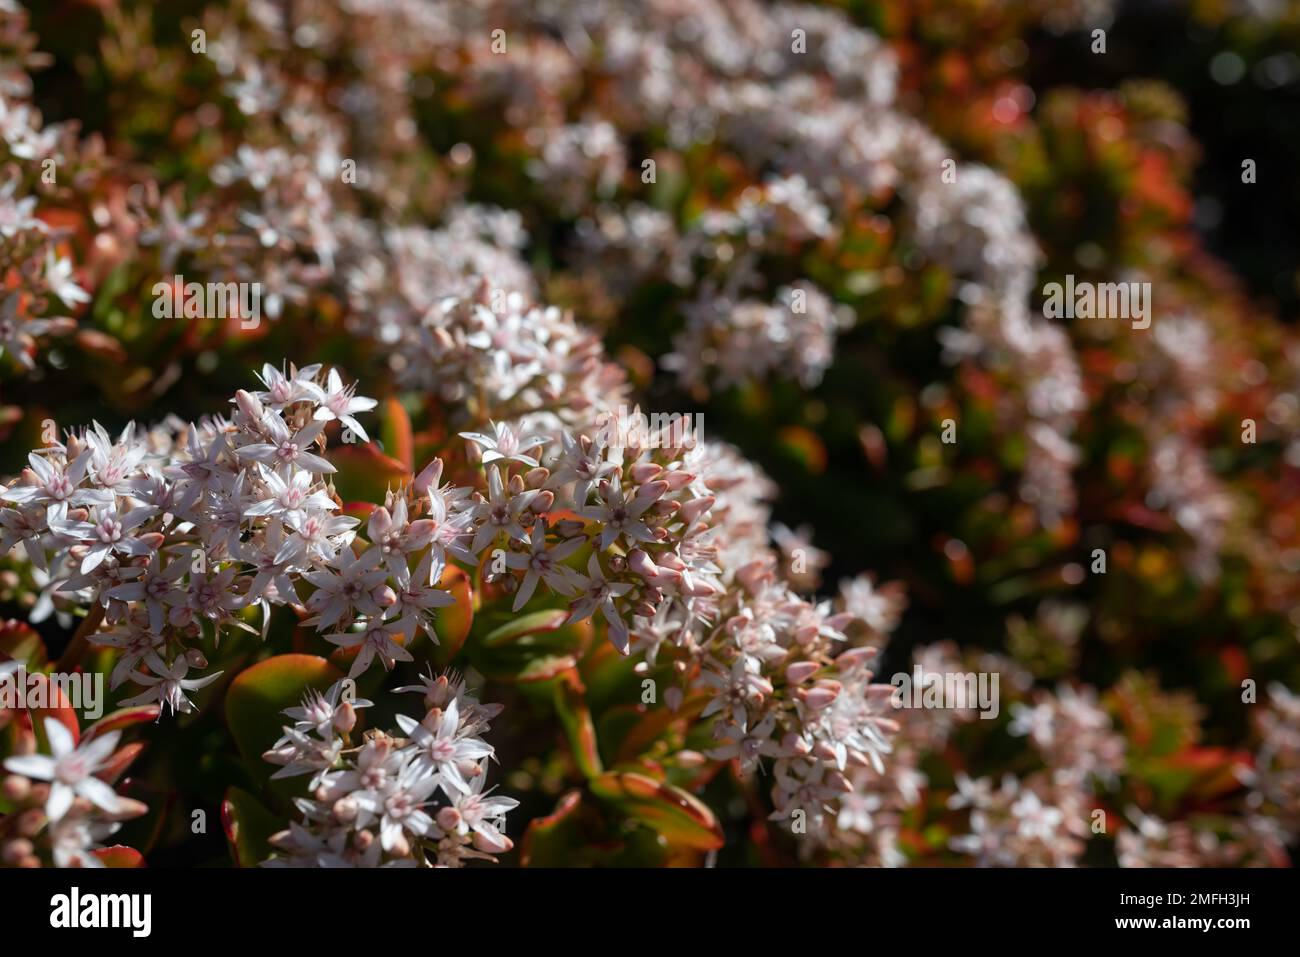 White flowers of Jade plant. Red edges of green leaves Stock Photo